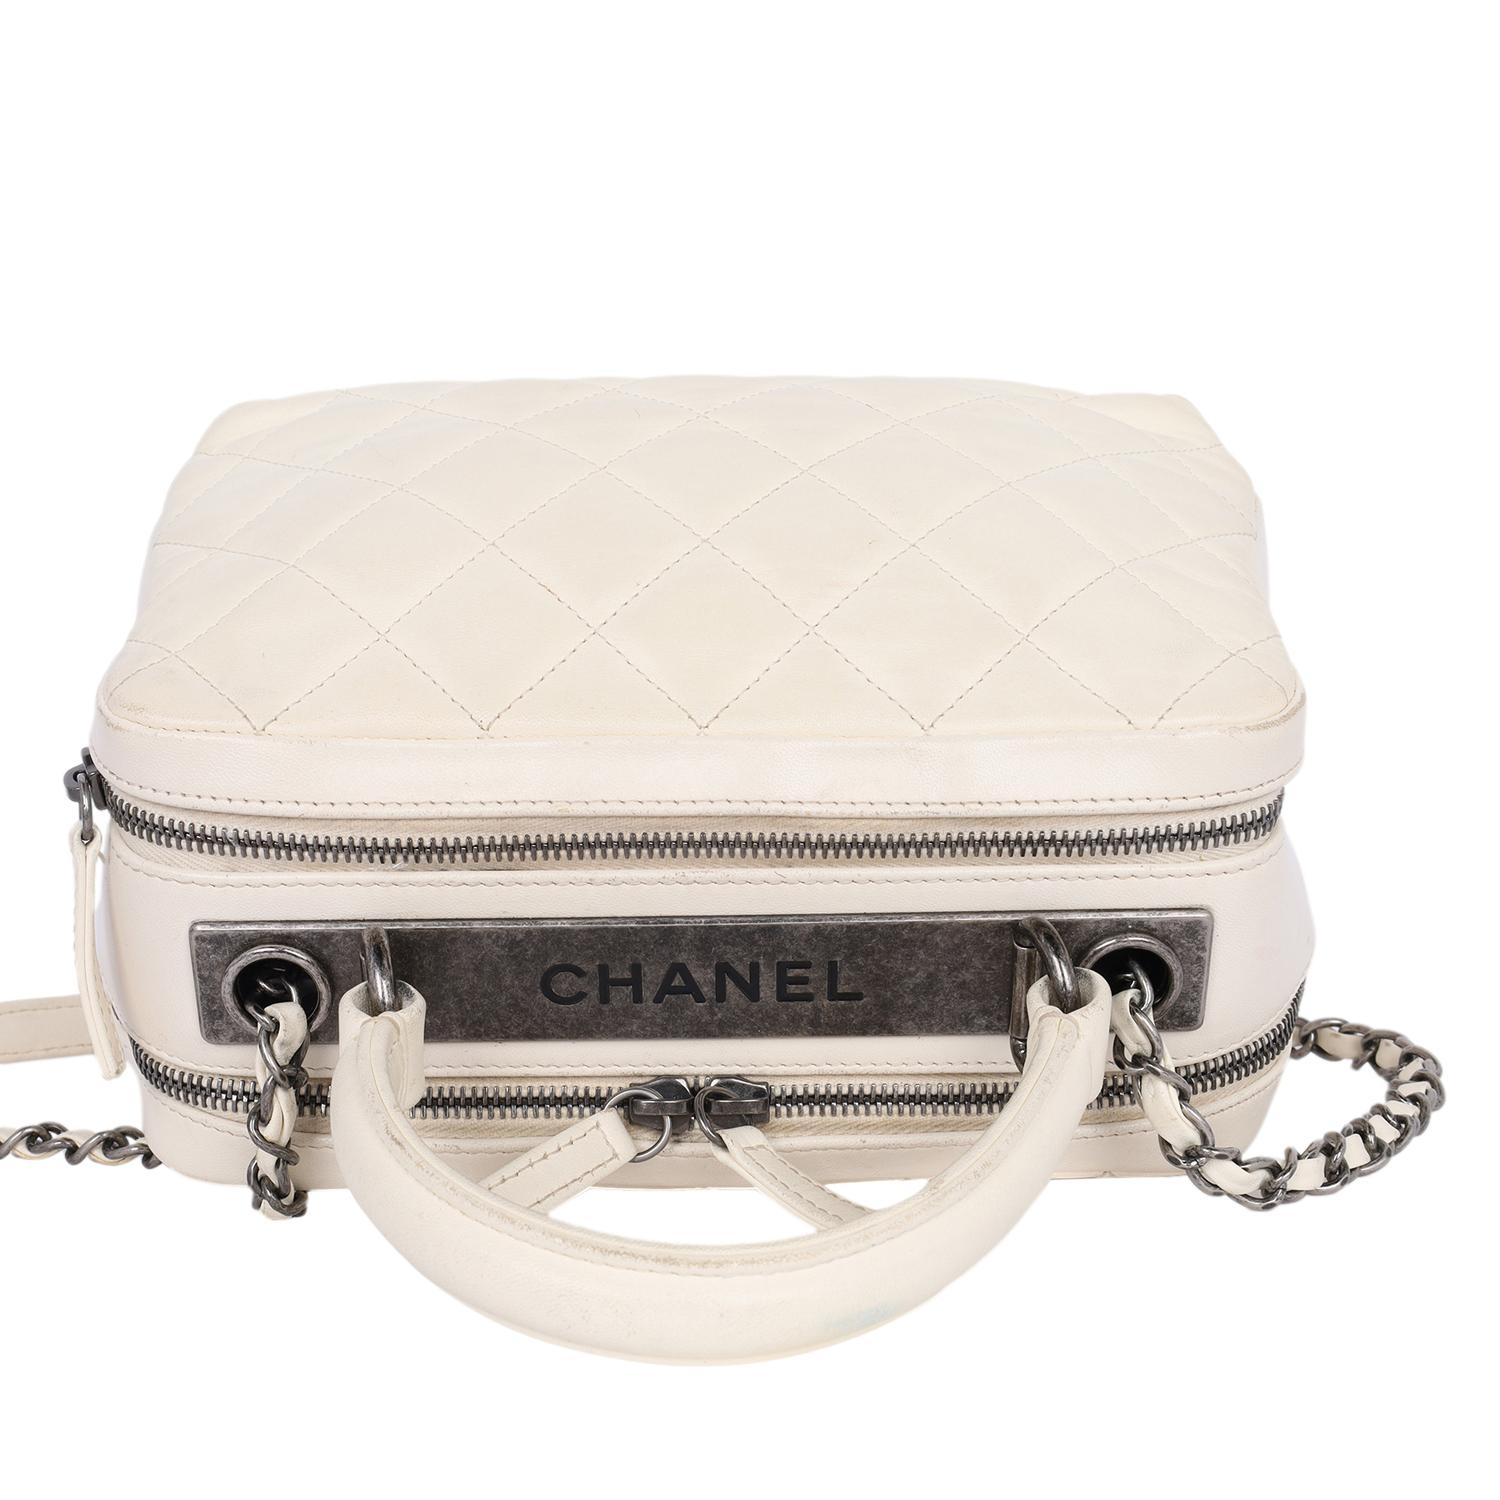 Chanel Lambskin Quilted Top Handle Vanity Case White For Sale 9